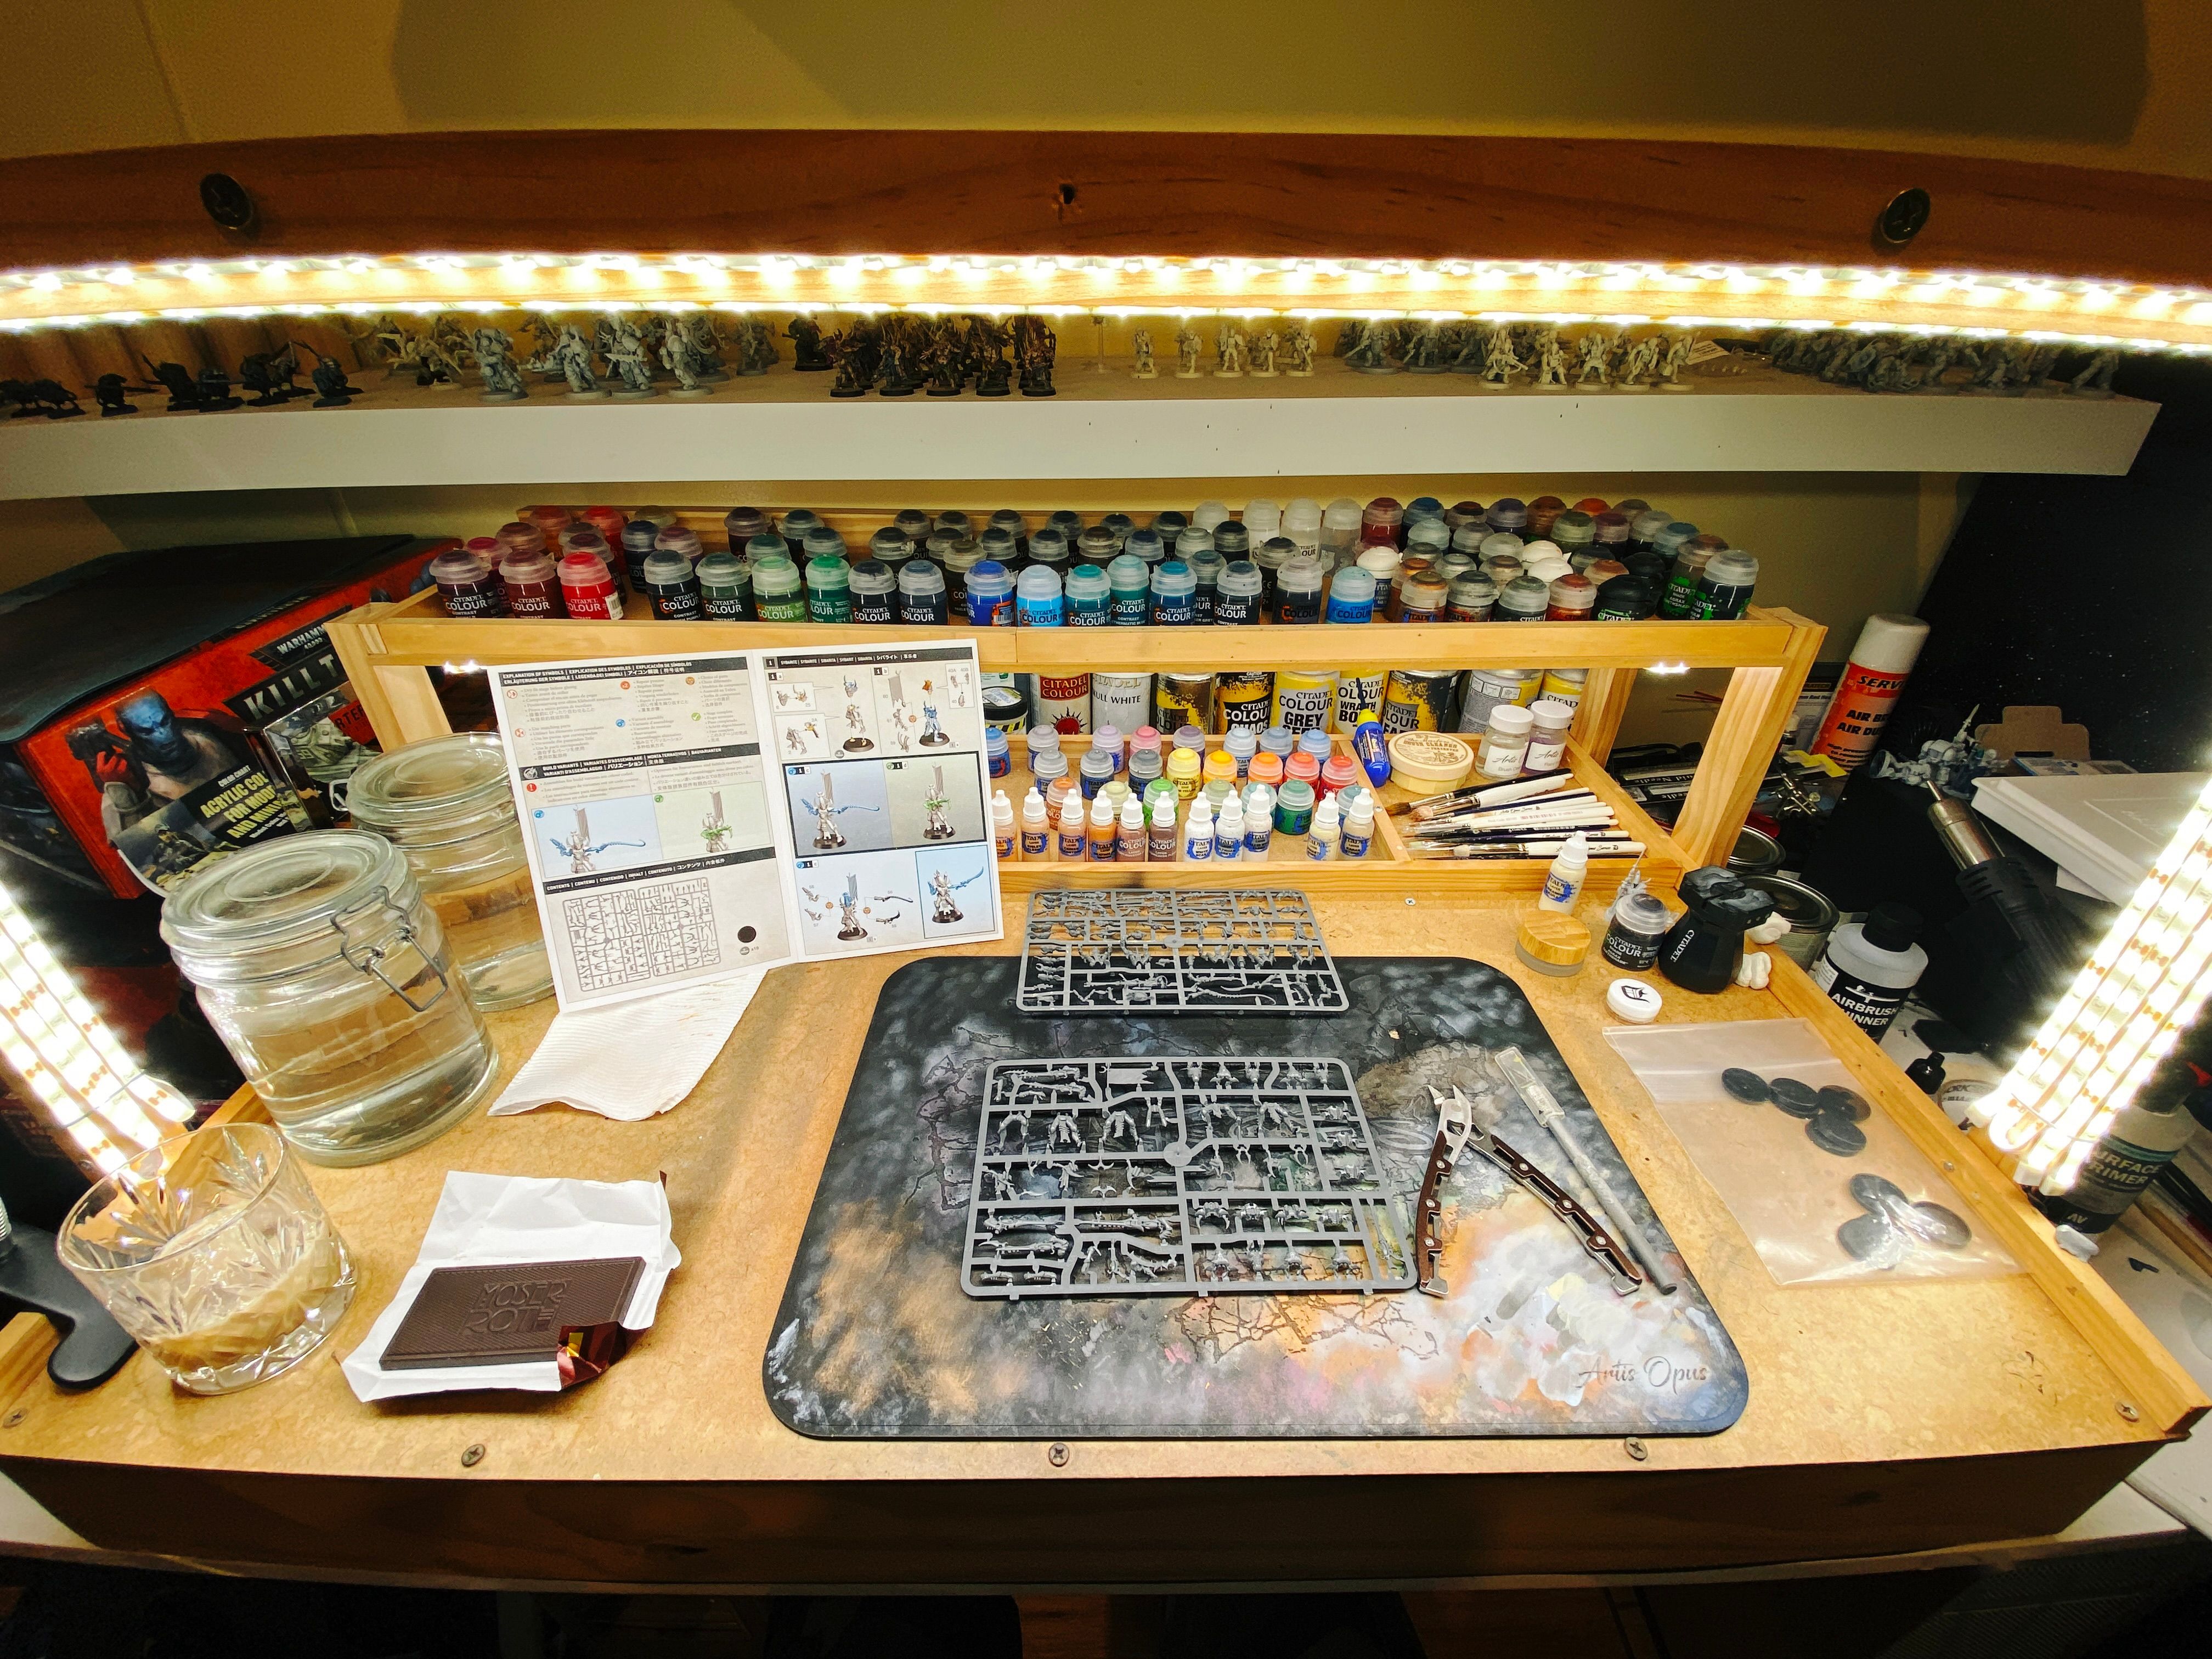 A photo of my painting desk with a two sprues of miniature parts on it, ready for assembly. Also a piece of dark chocolate and an alcoholic beverage.